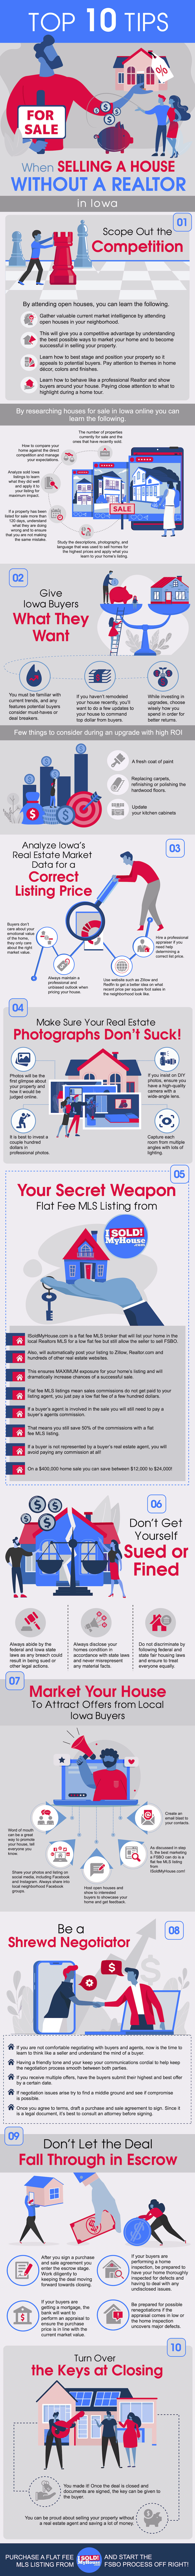 infographic of the 10 steps to sell a house in iowa without an agent